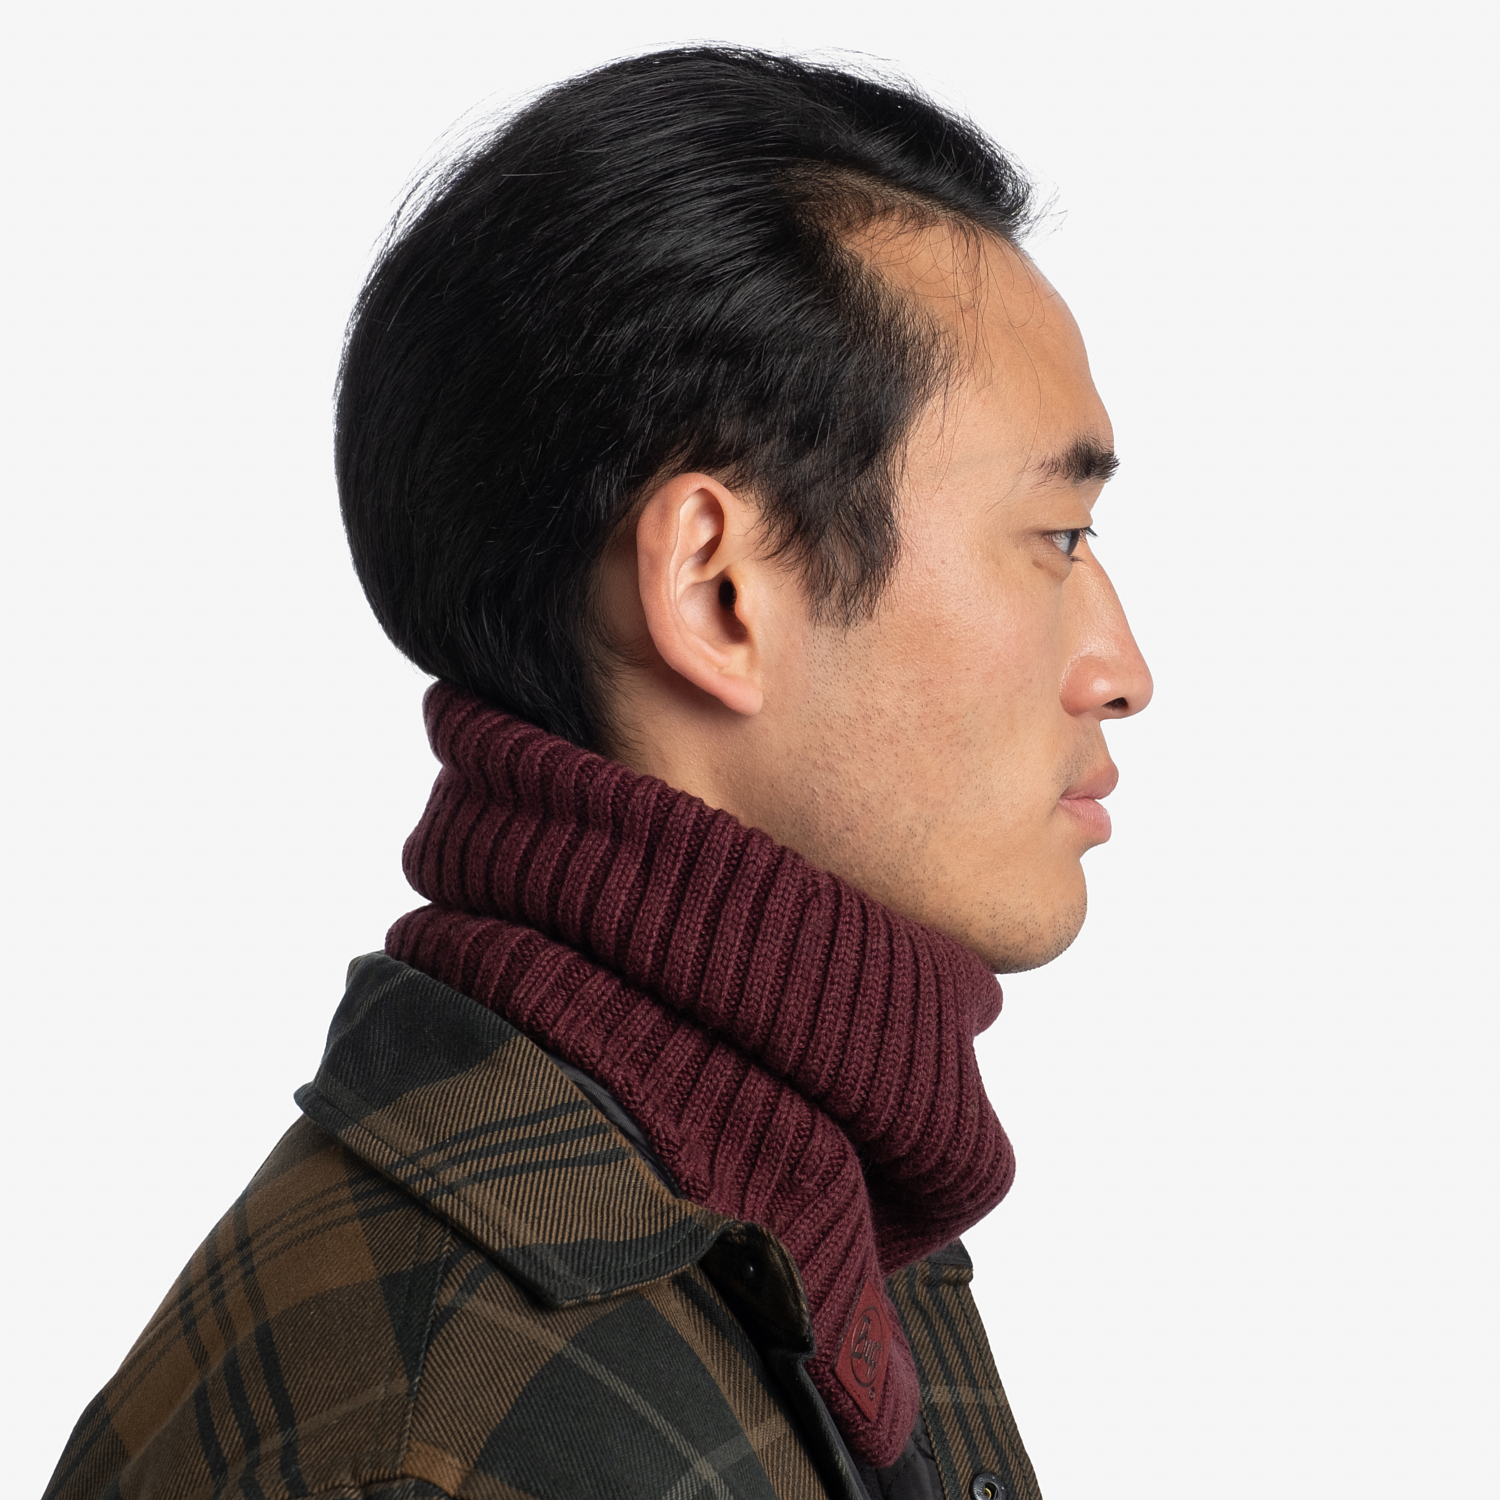 Шарф Buff Knitted Neckwarmer Norval Maroon